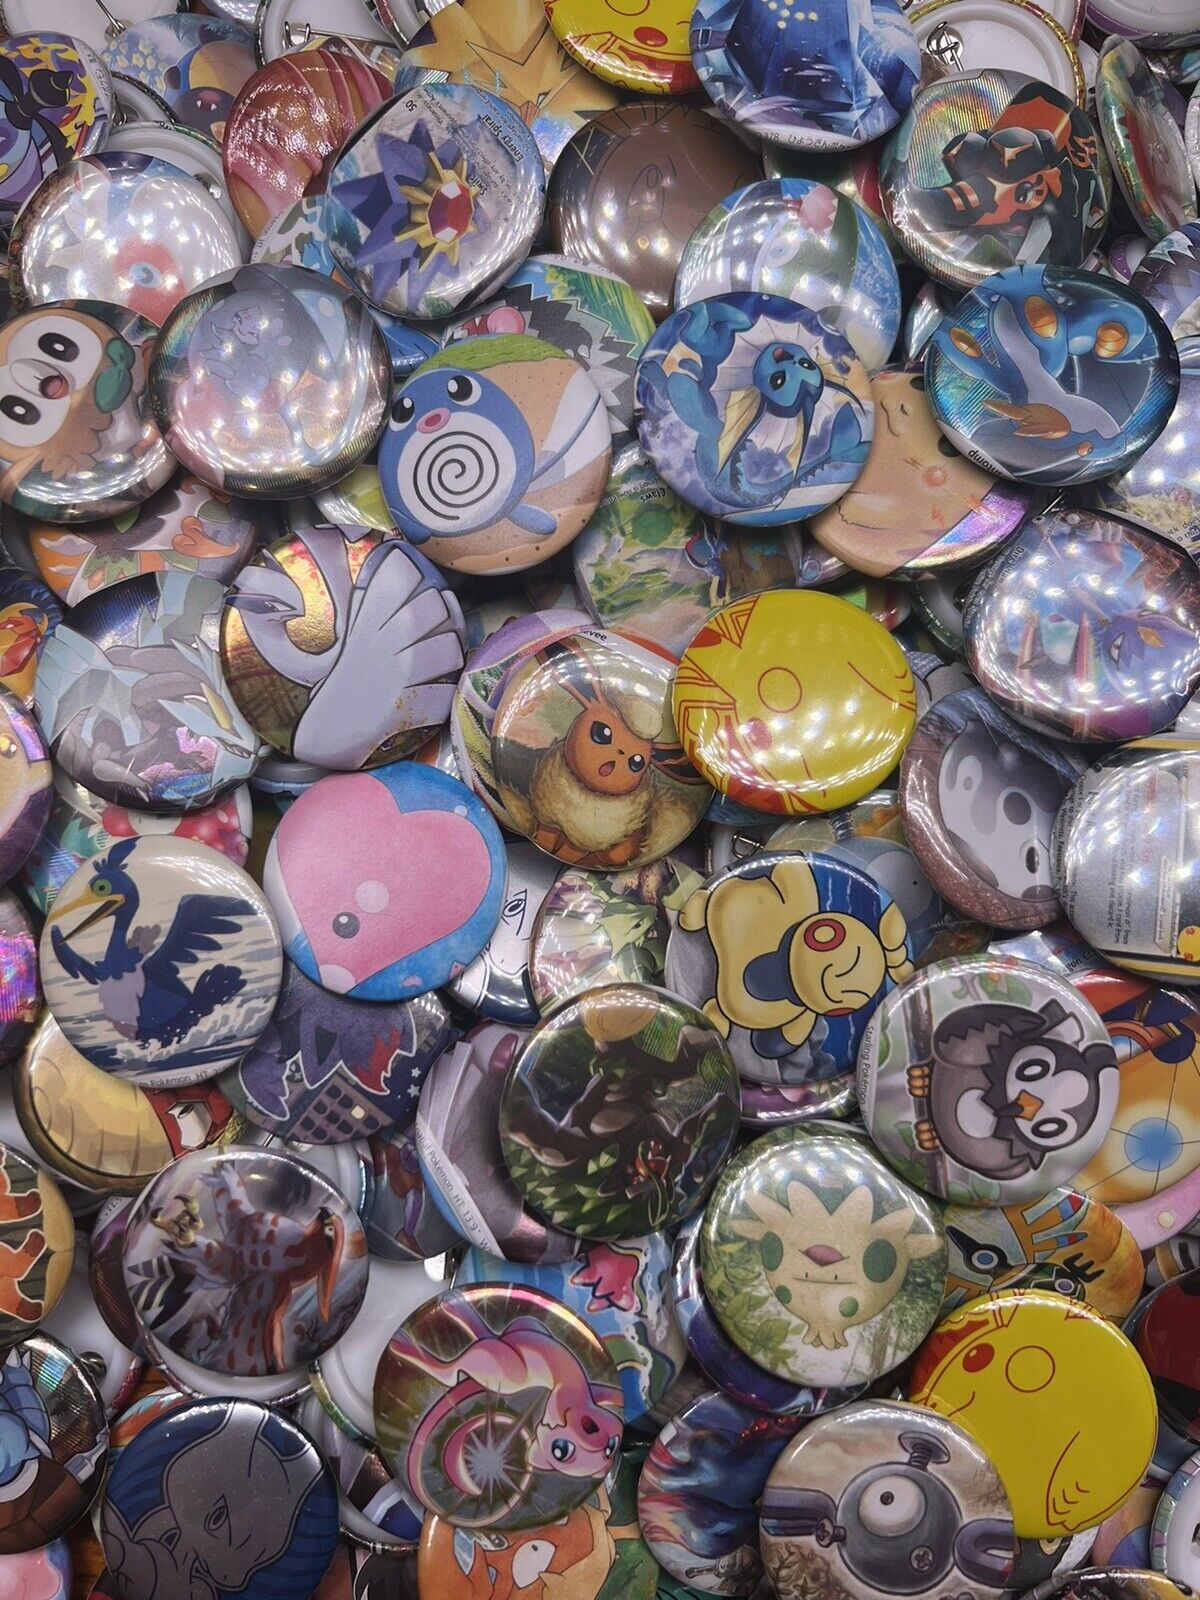 400 Pokémon Buttons/Badges/Pins Made From Pokemon Cards, Sleeves And ETB Books